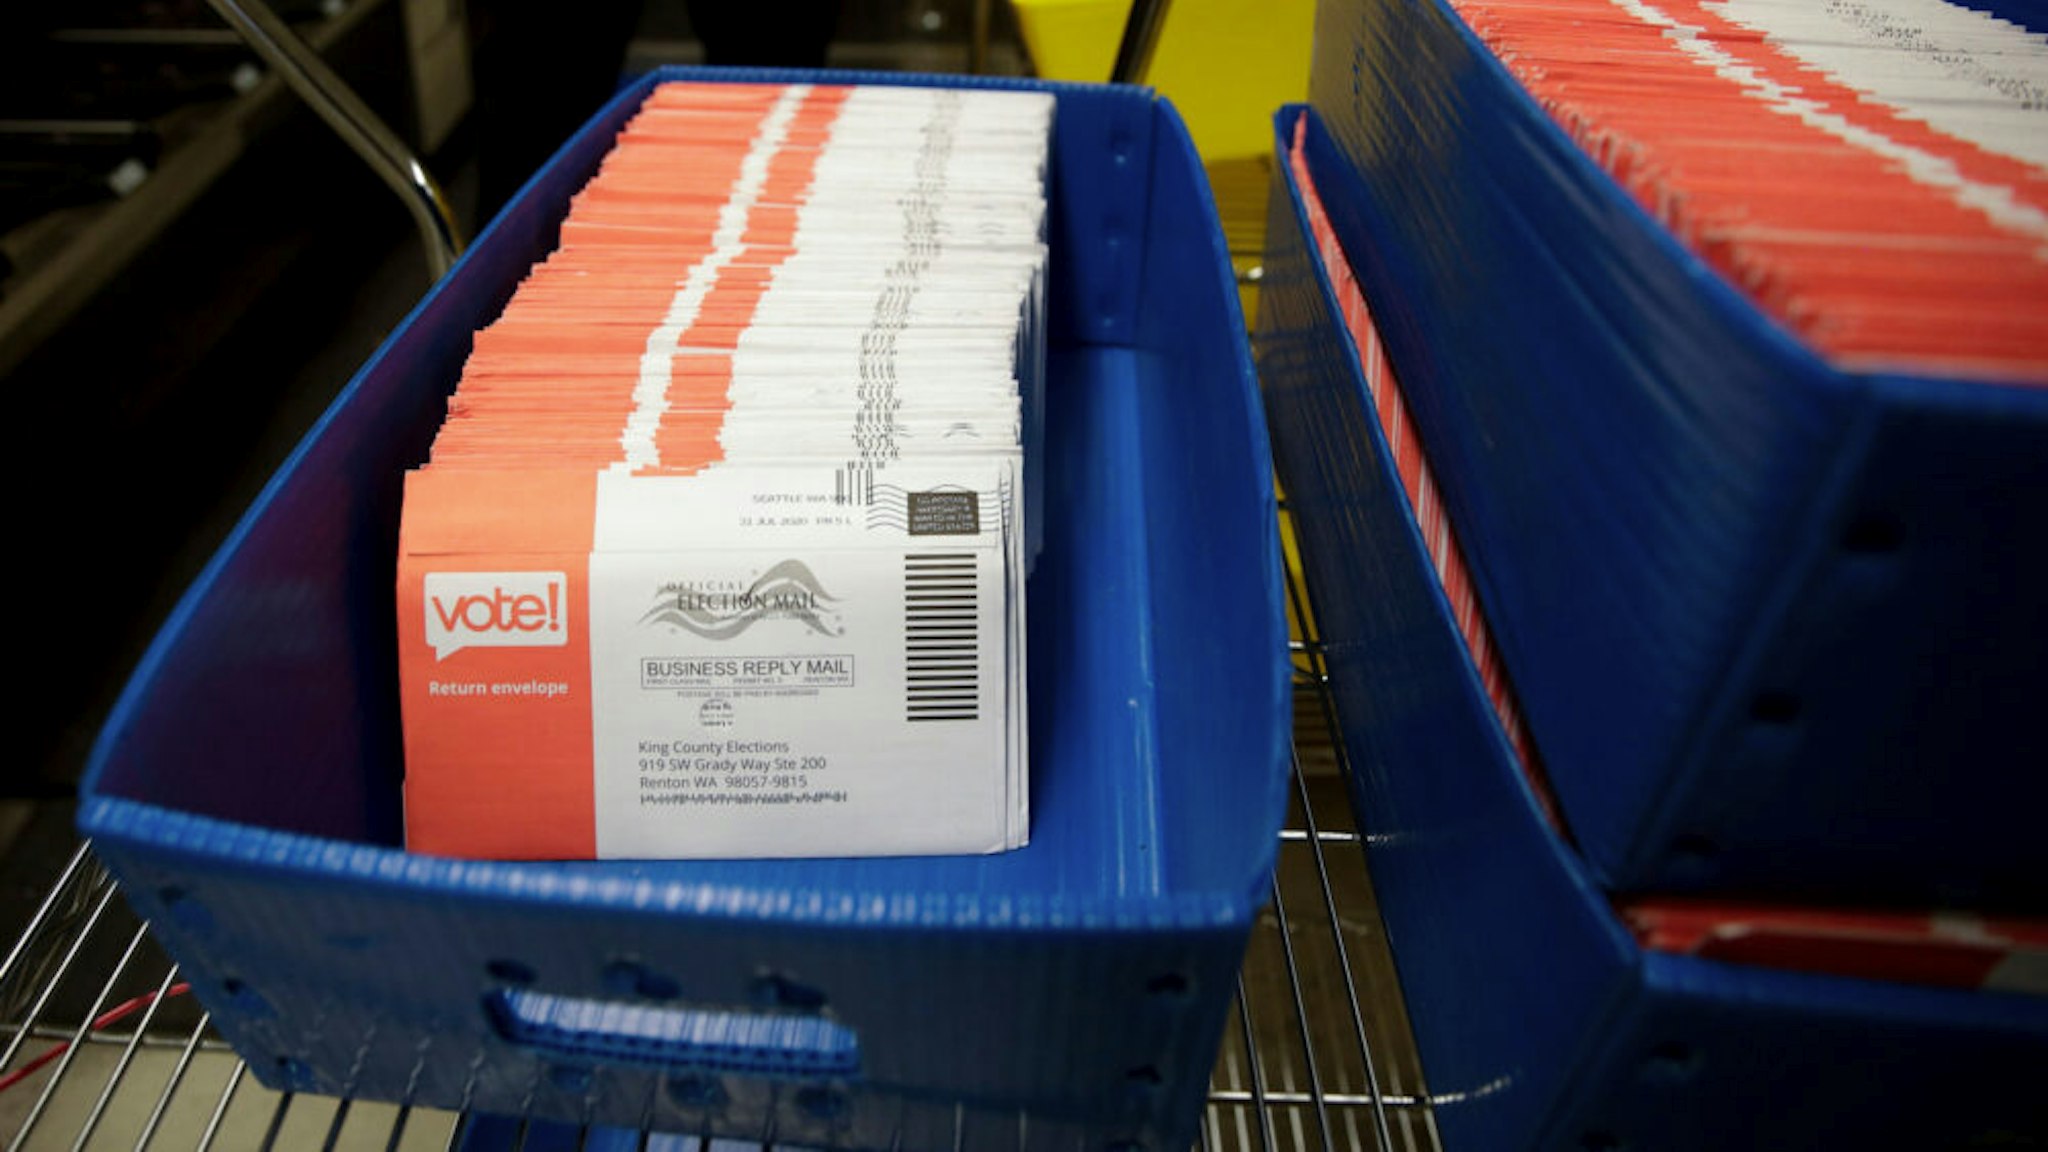 Vote-by-mail ballots for the August 4 Washington state primary are pictured at King County Elections in Renton, Washington on August 3, 2020.